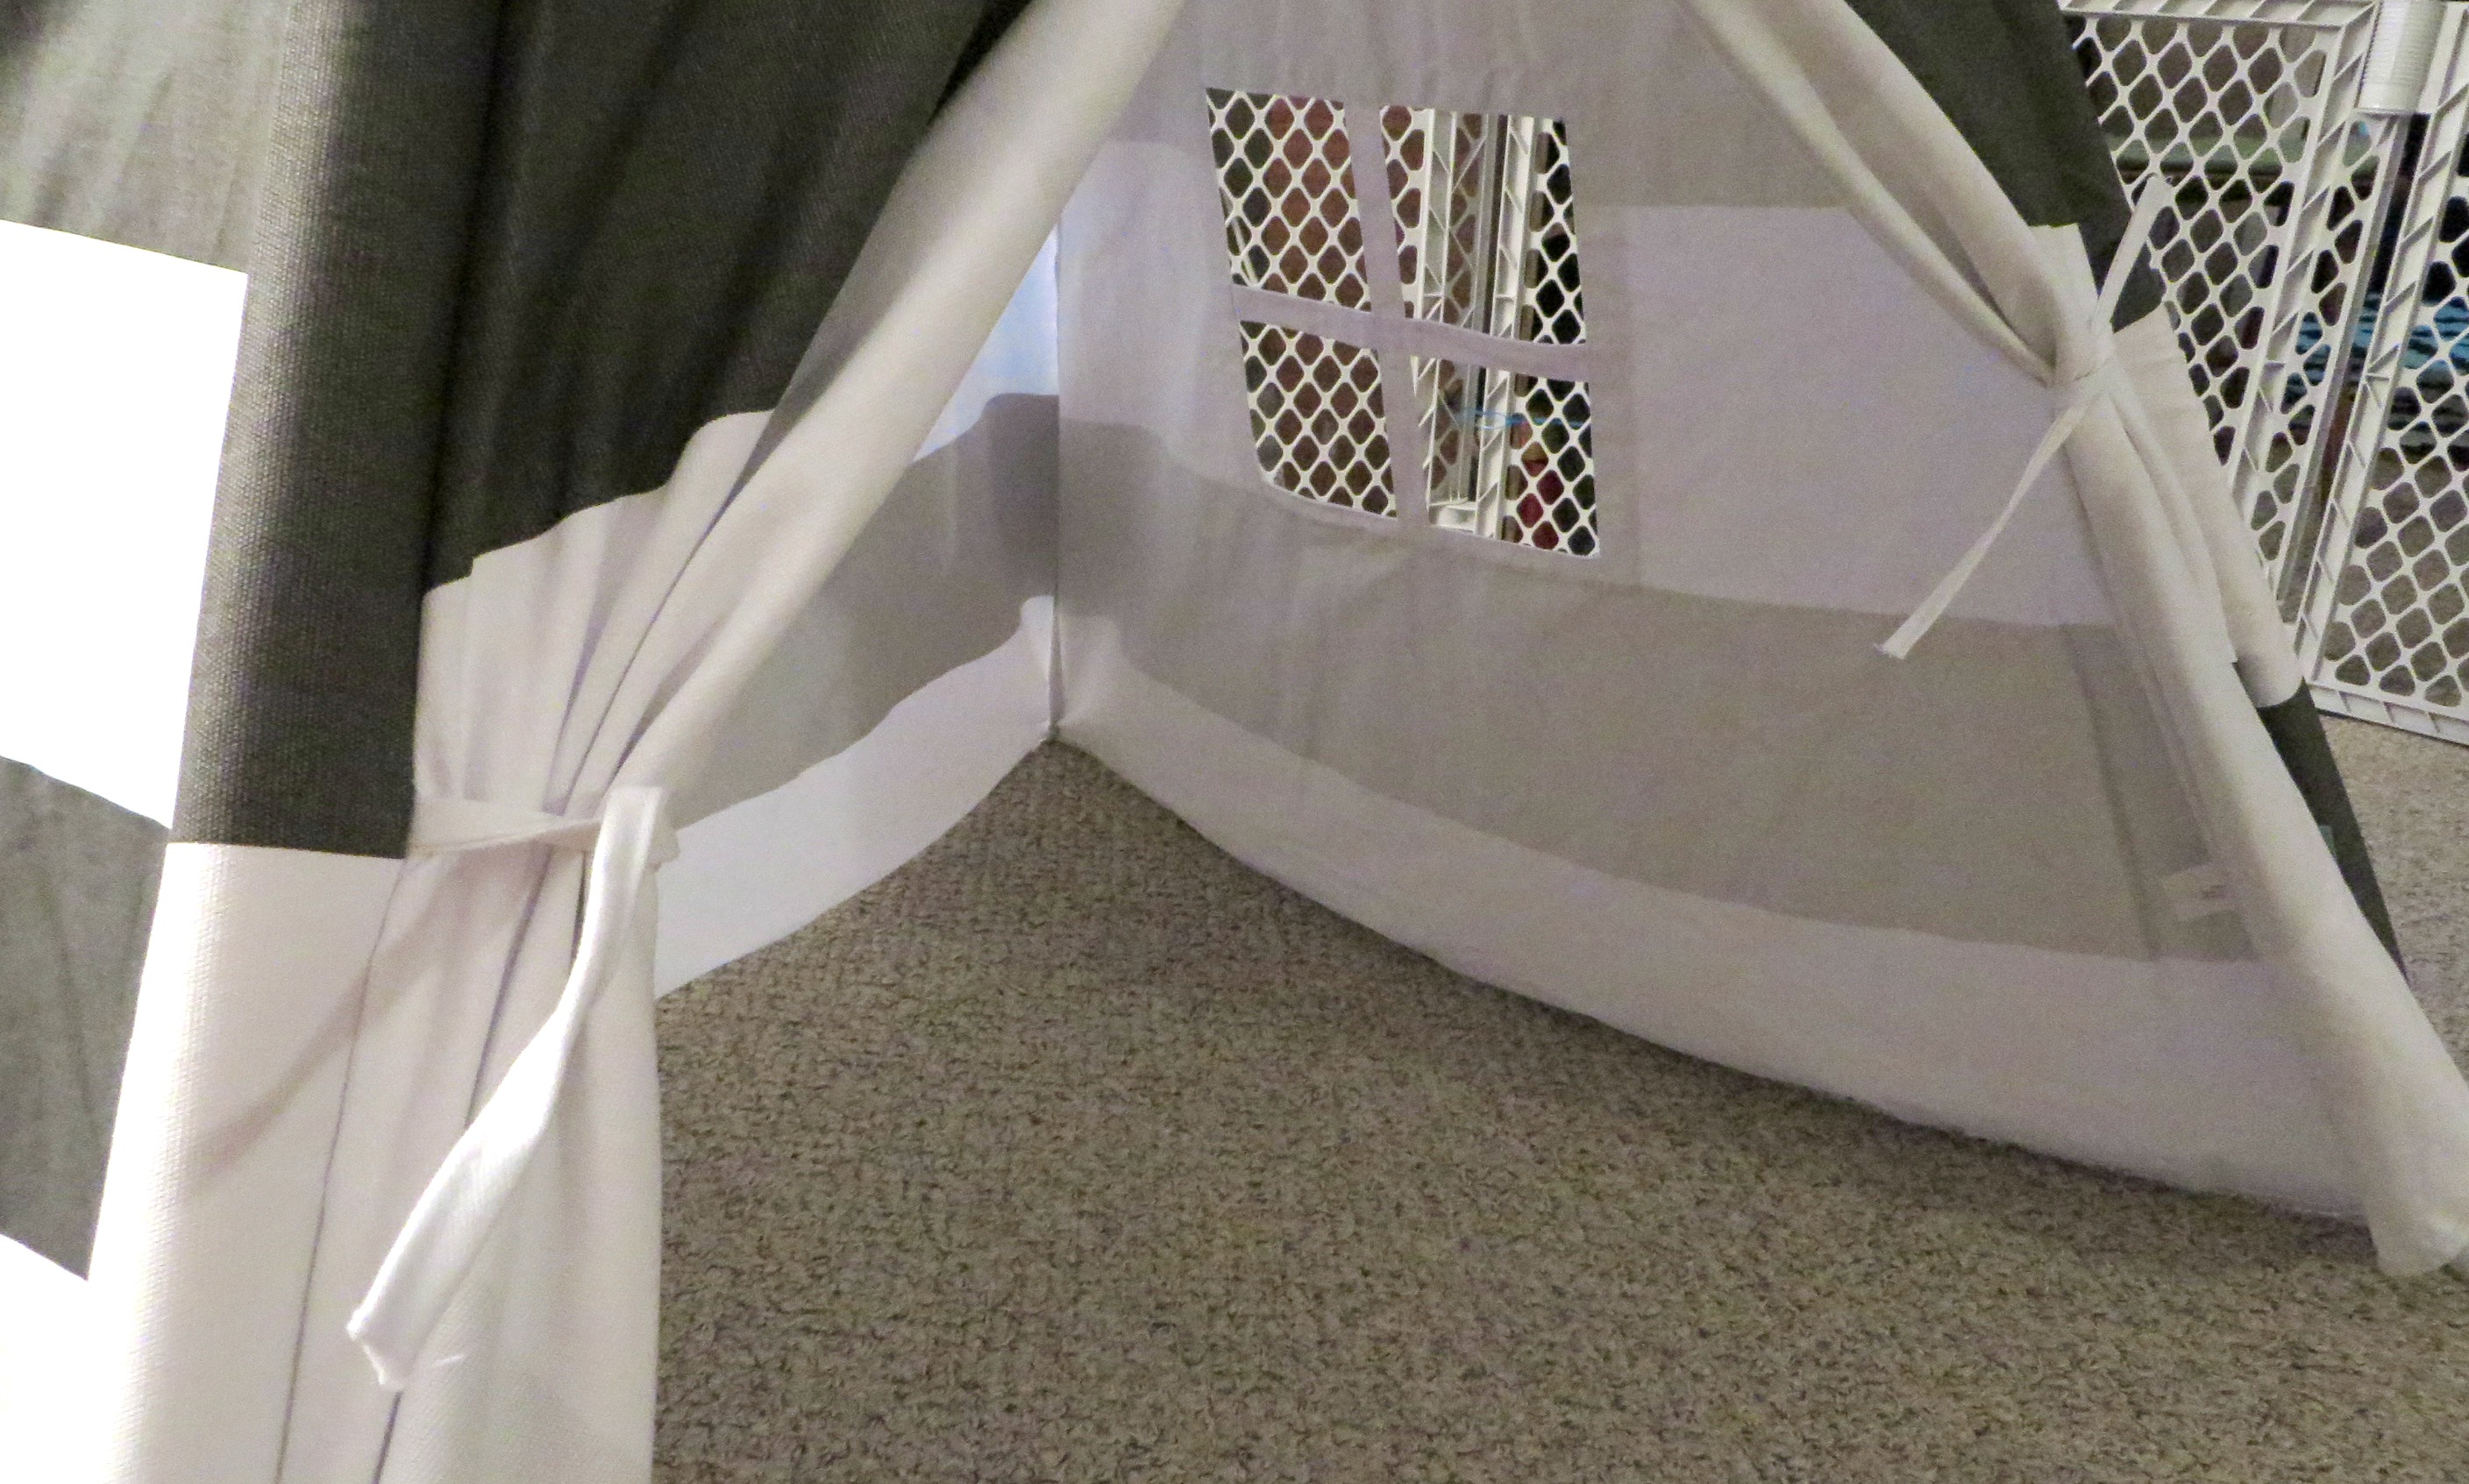 US Japan Fam reviews and loves Tiny Hideaways Teepee Tent - door with velcro and ties!